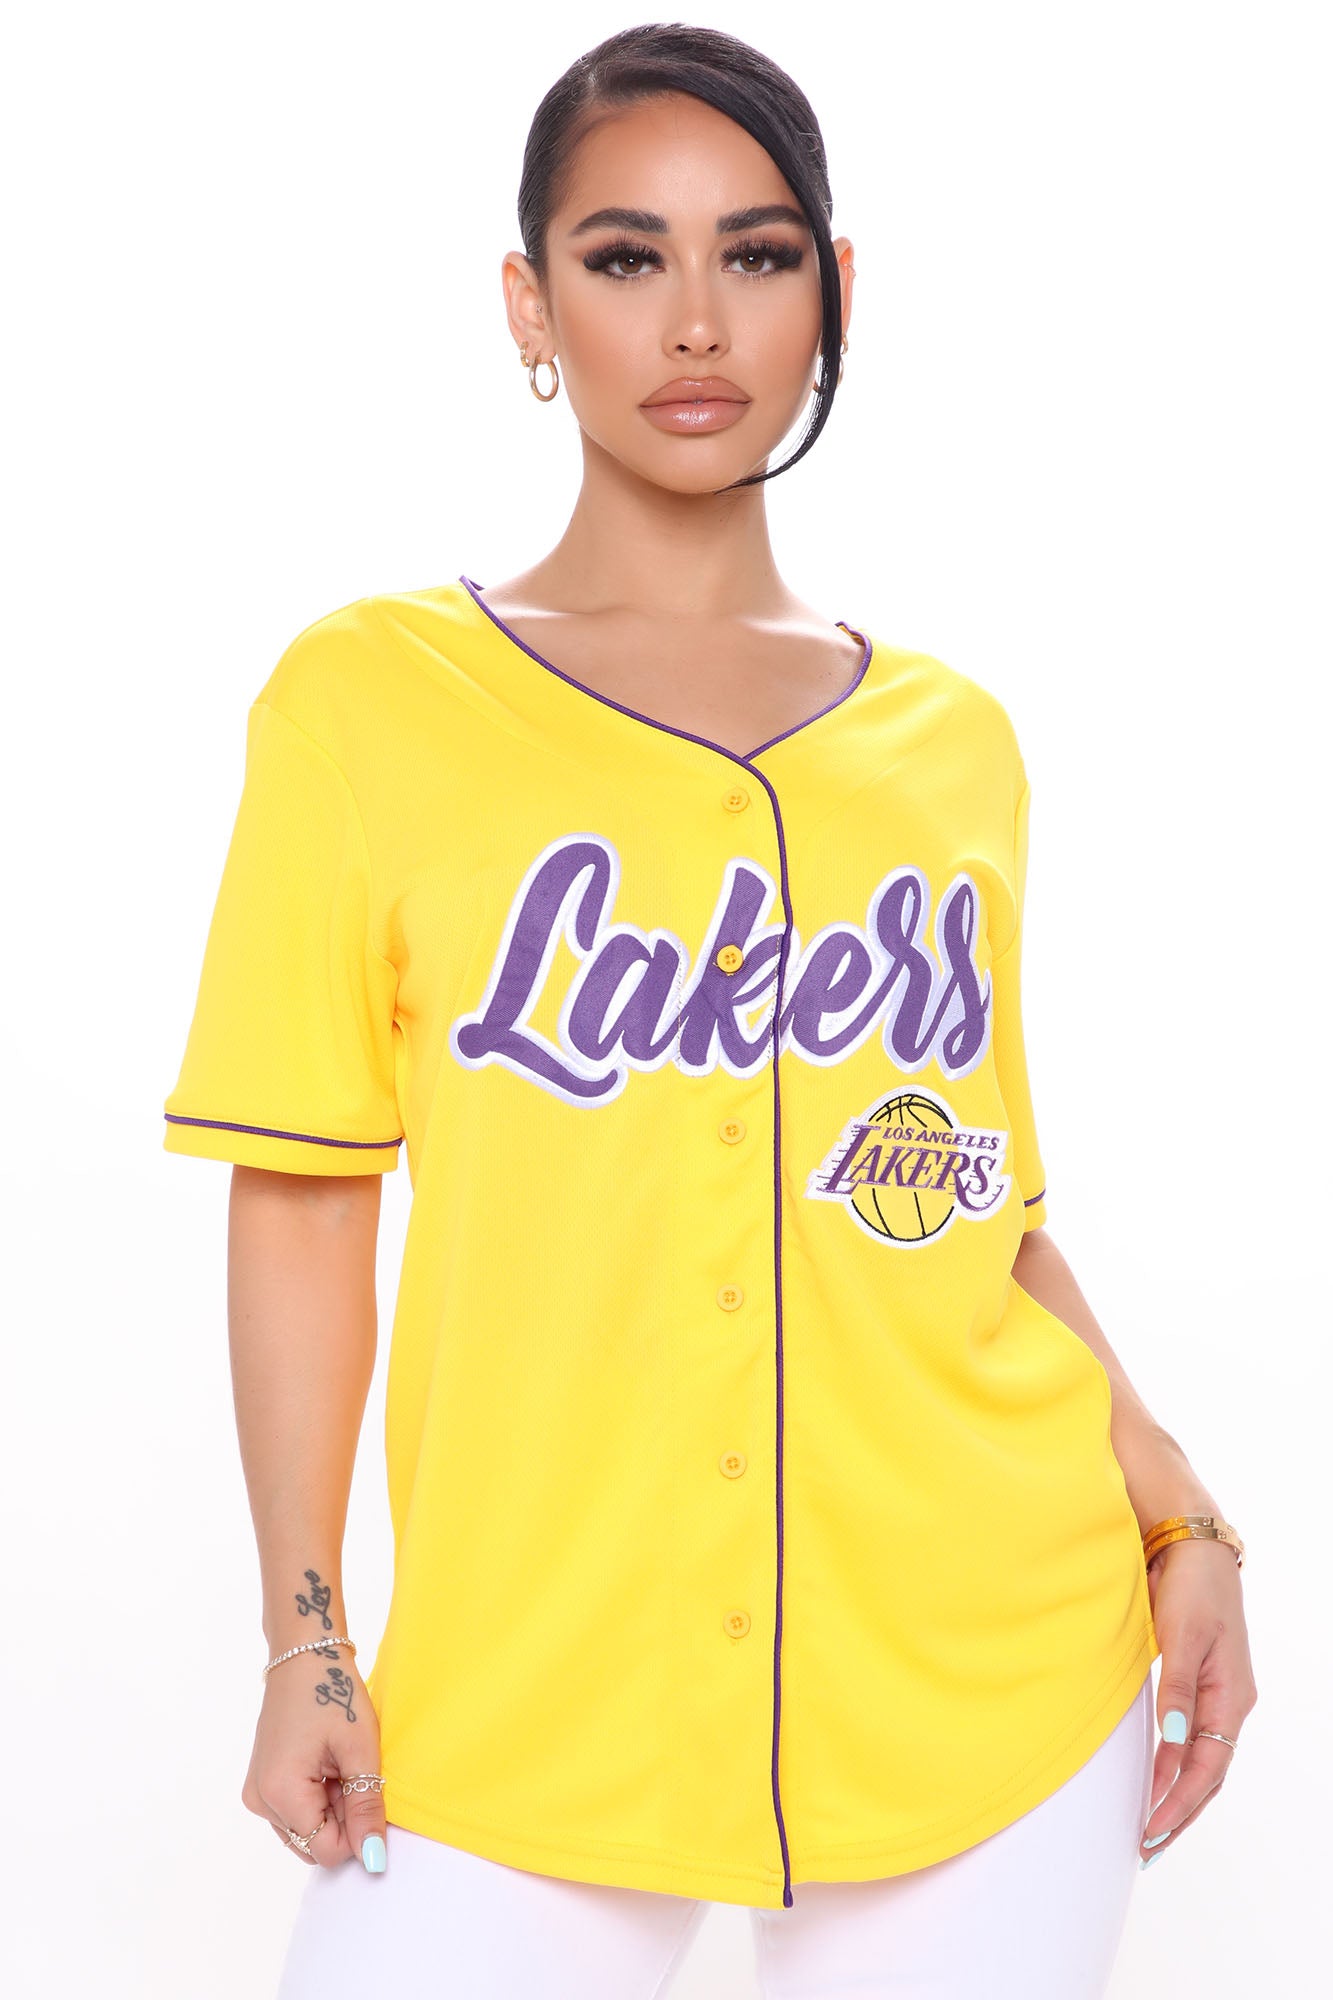 lakers women's clothing